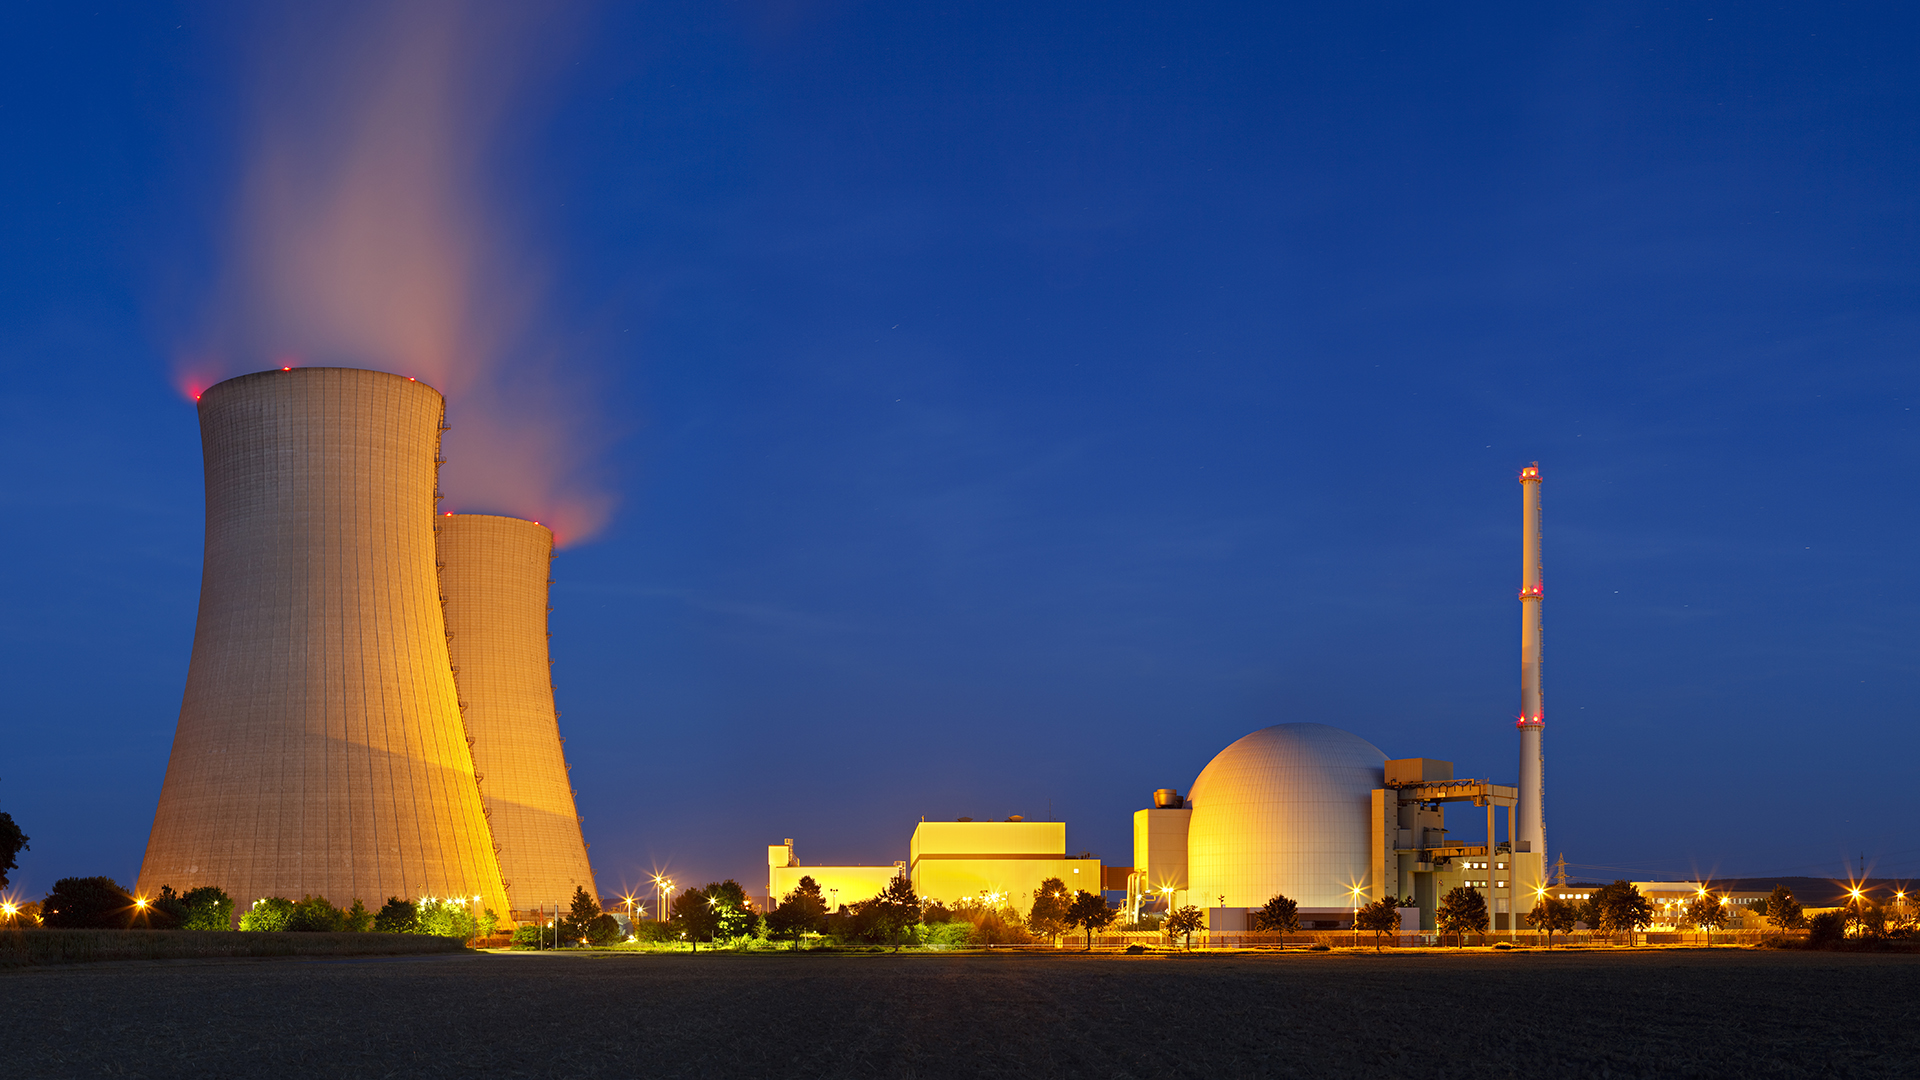 Nuclear energy roadmap launched by experts at Manchester University.